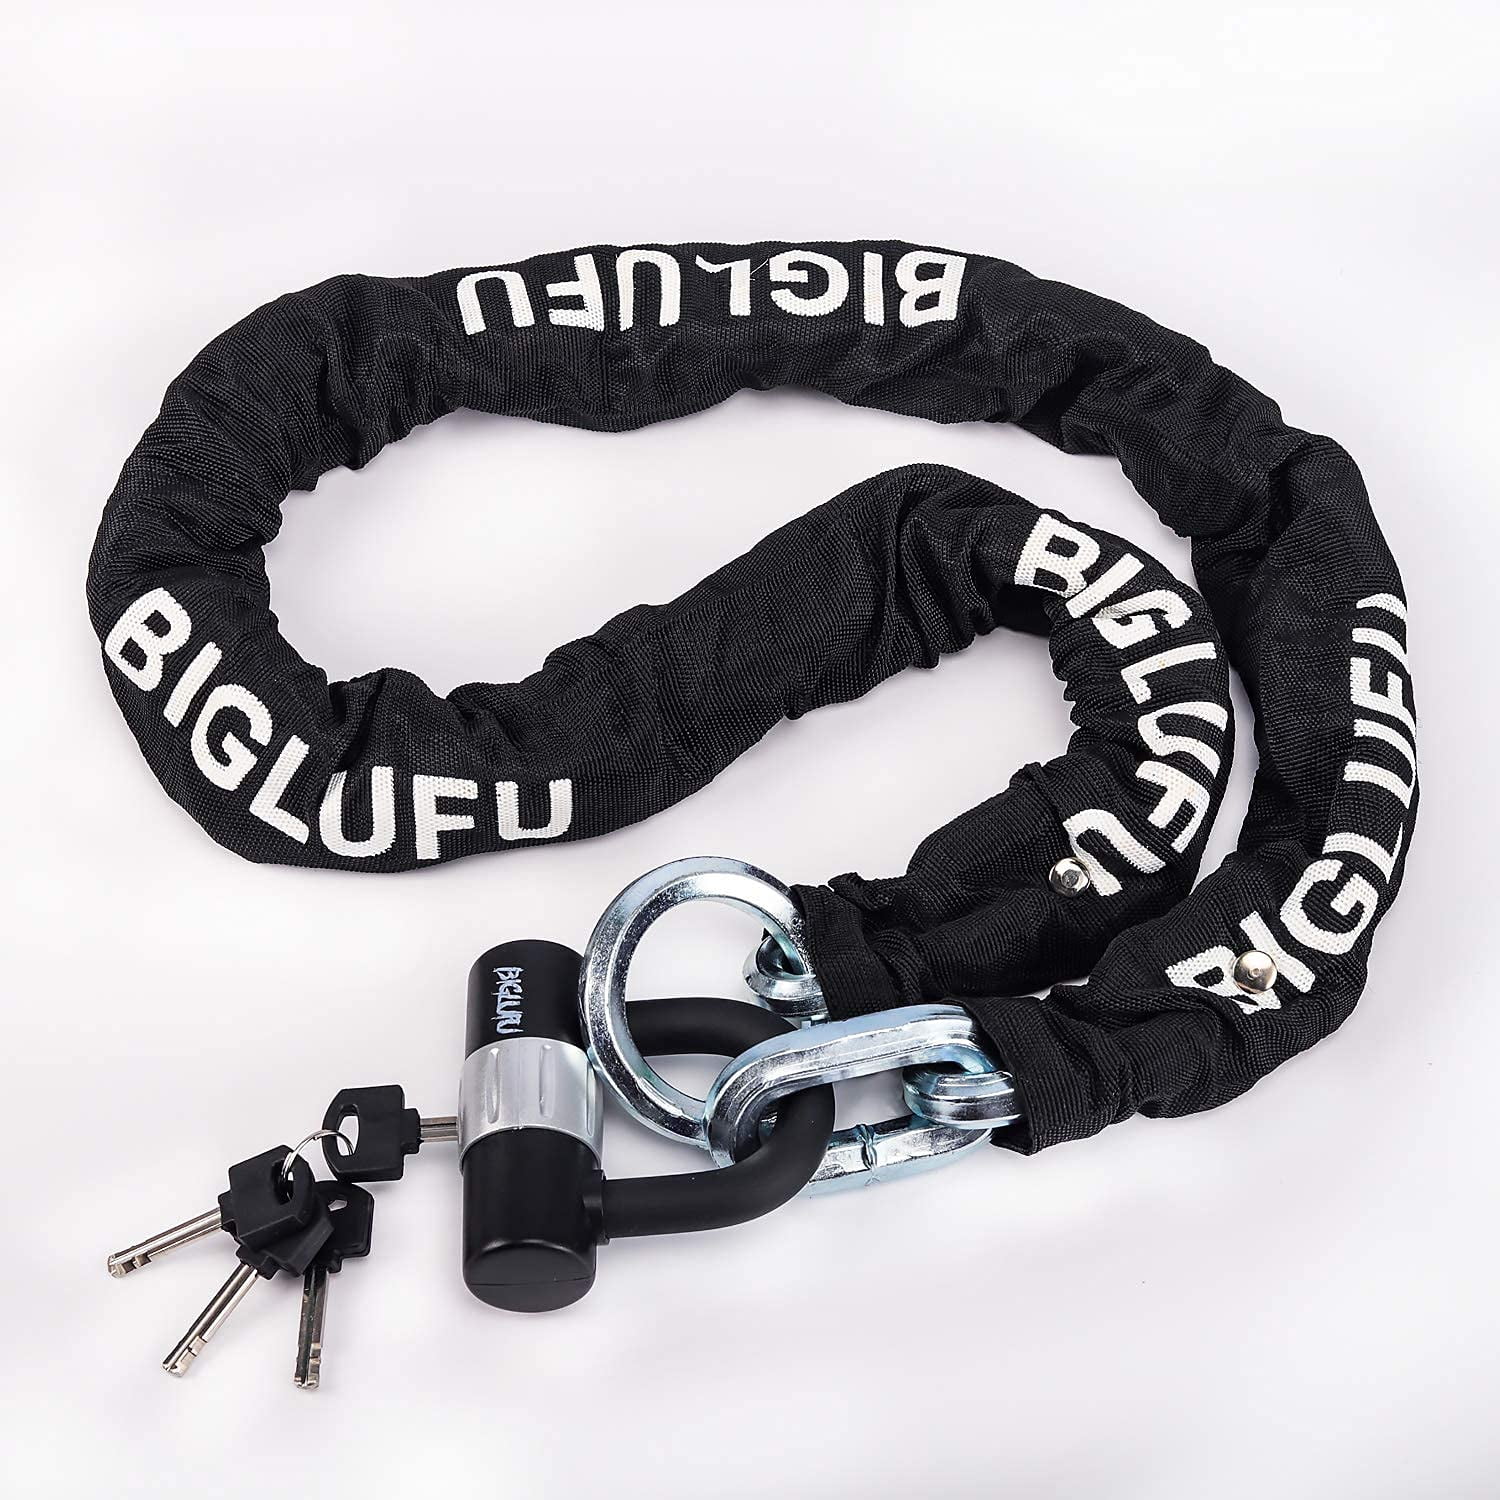  (31 inch Long) Security Chain and Lock Kit，Chain Lock